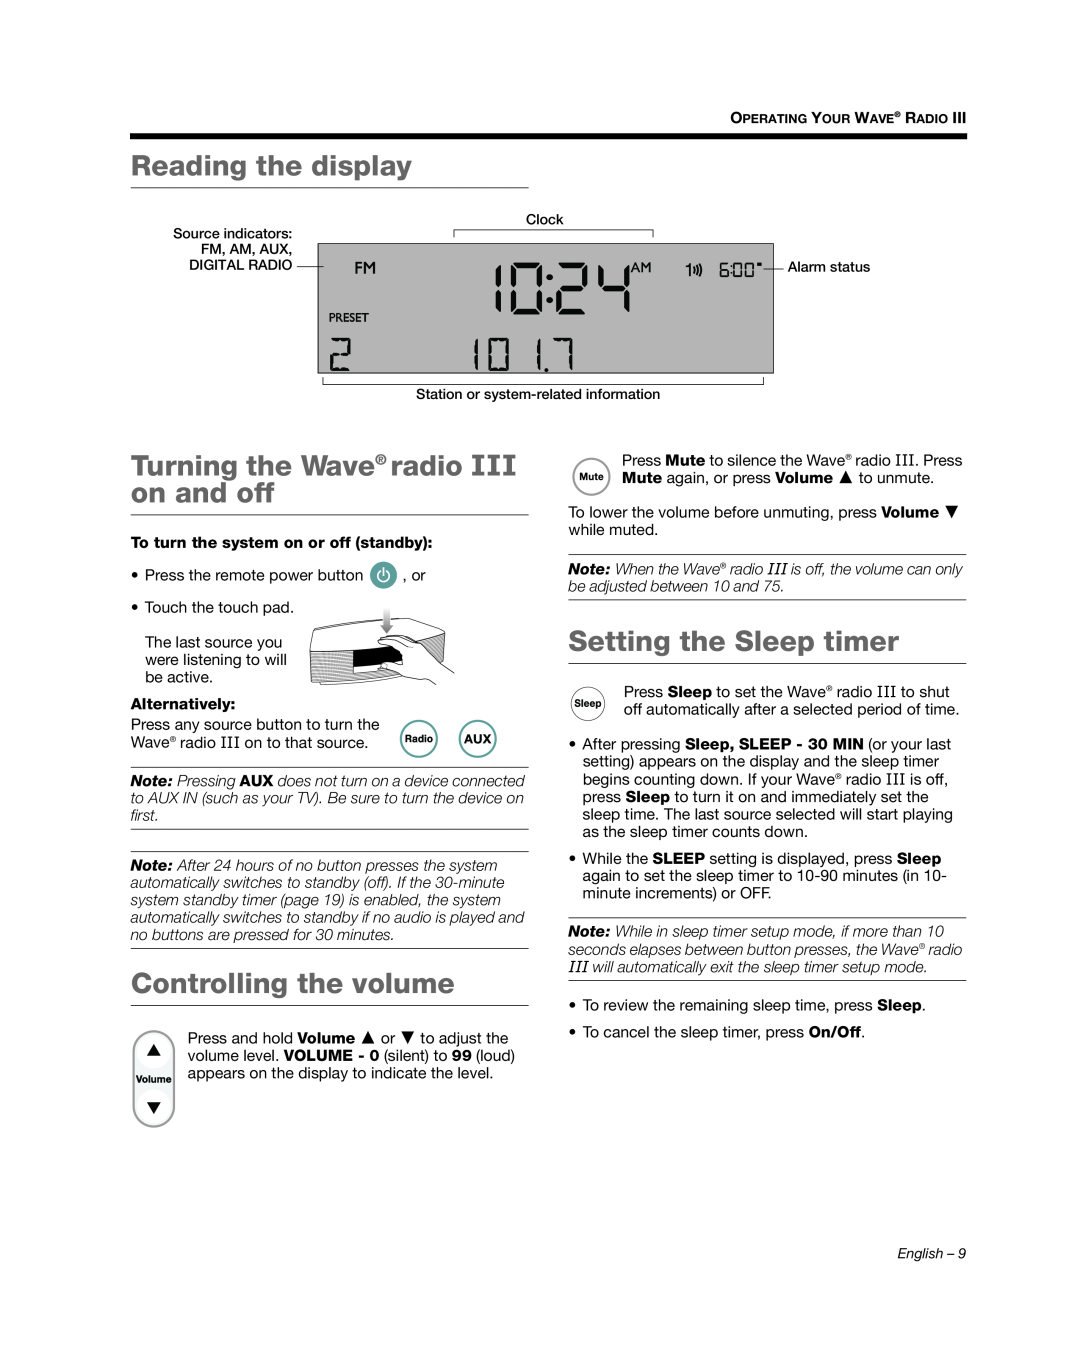 Bose manual Reading the display, Turning the Wave radio III on and off, Controlling the volume, Setting the Sleep timer 